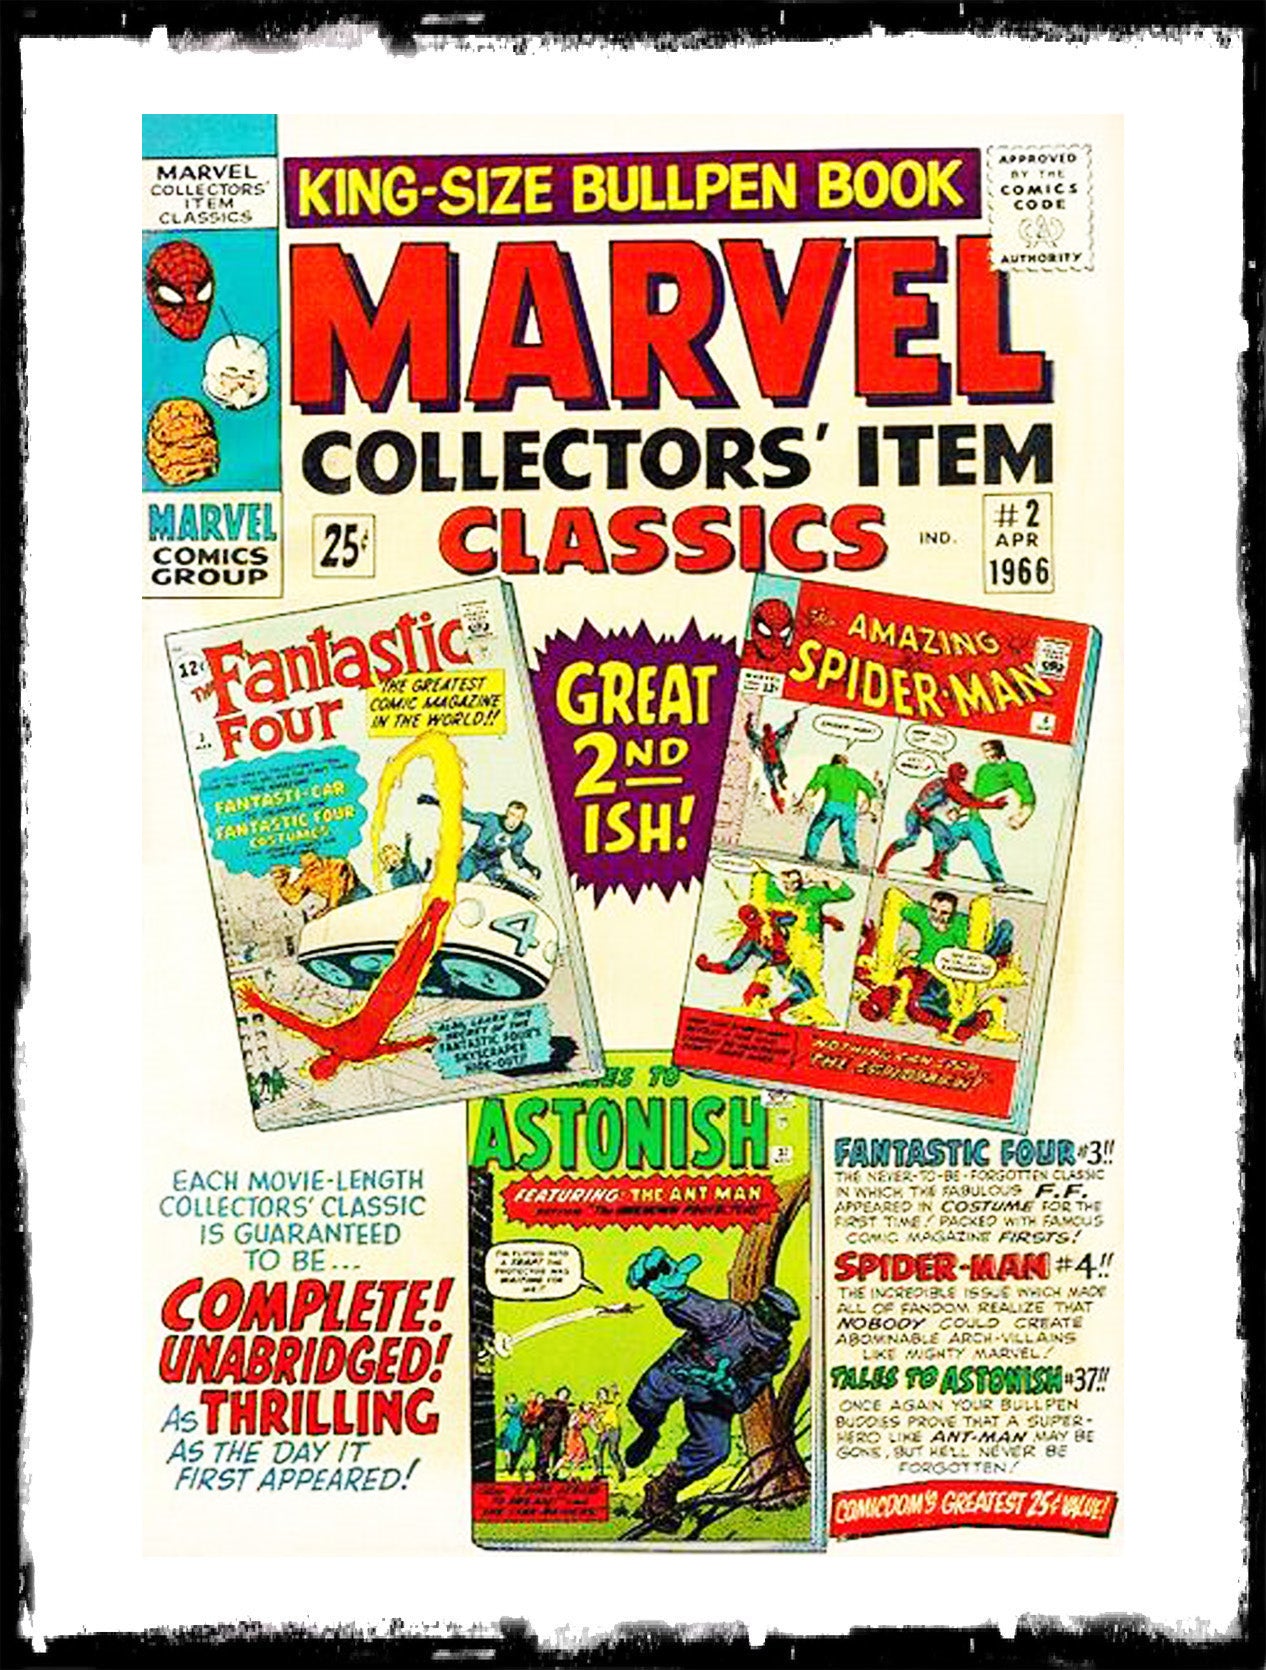 MARVEL COLLECTOR’S ITEM CLASSICS - #2 KING-SIZE BULLPEN BOOK (1966 - VF)